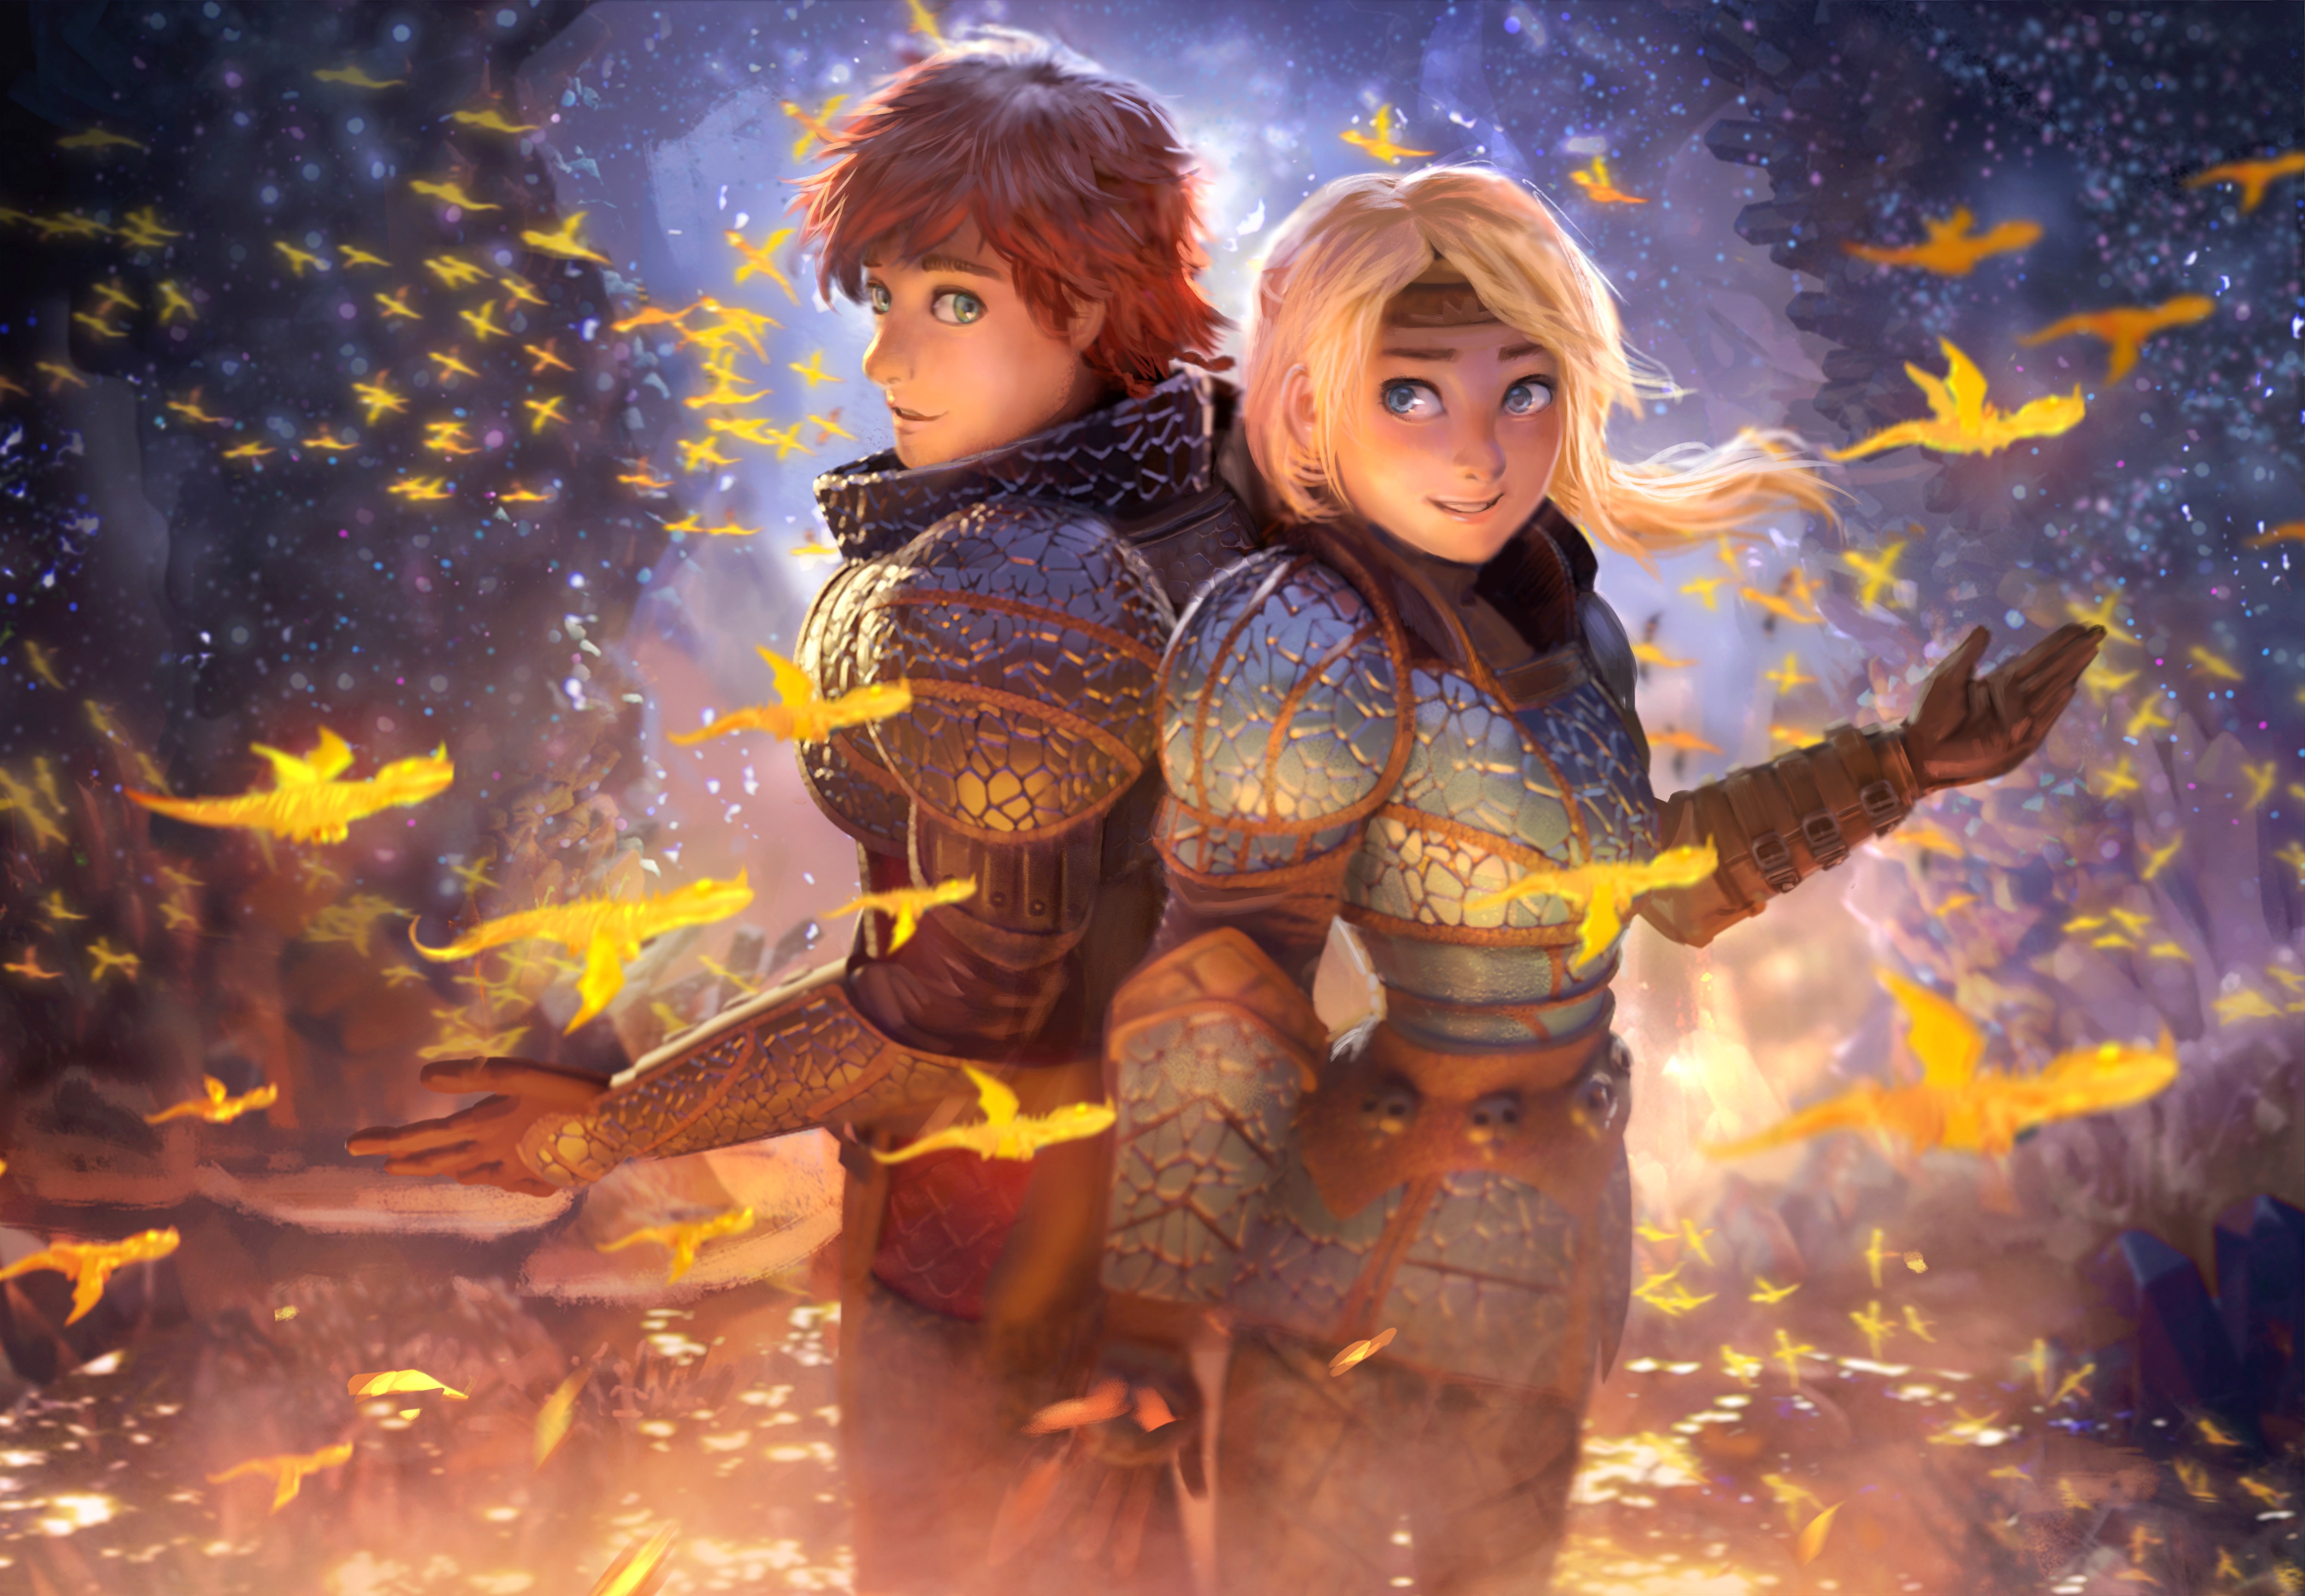 General 5000x3463 digital art artwork How to Train Your Dragon: The Hidden World Toothless Dreamworks Hiccup Astrid Hofferson